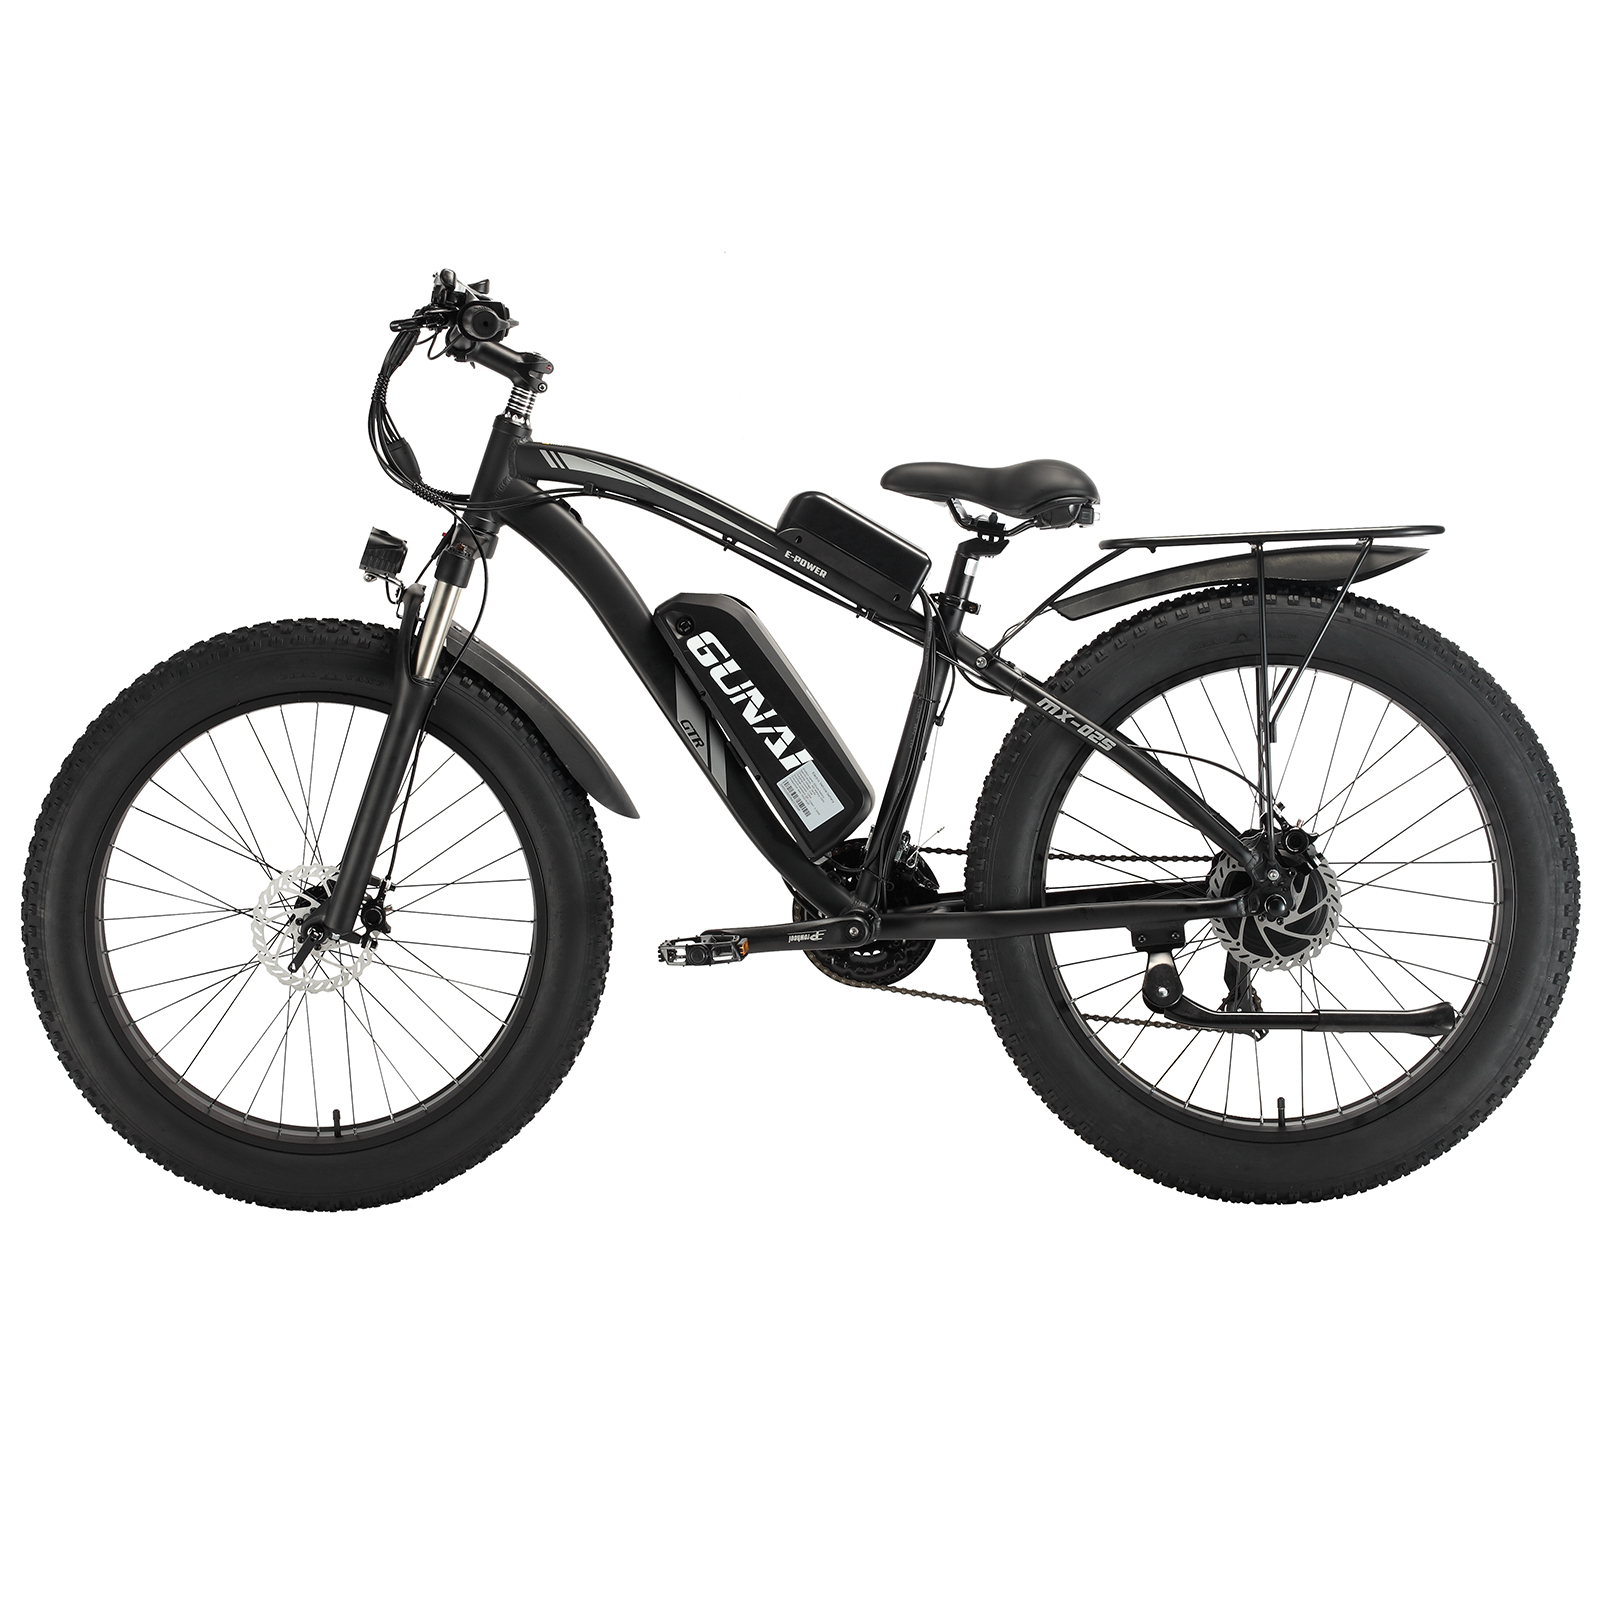 Find EU Direct SHENGMILO MX02S 1000W 48V 17Ah 26 Inch Electric Bicycle 40 50km Mileage Range 150kg Max Load 21 speed Electric Bike for Sale on Gipsybee.com with cryptocurrencies